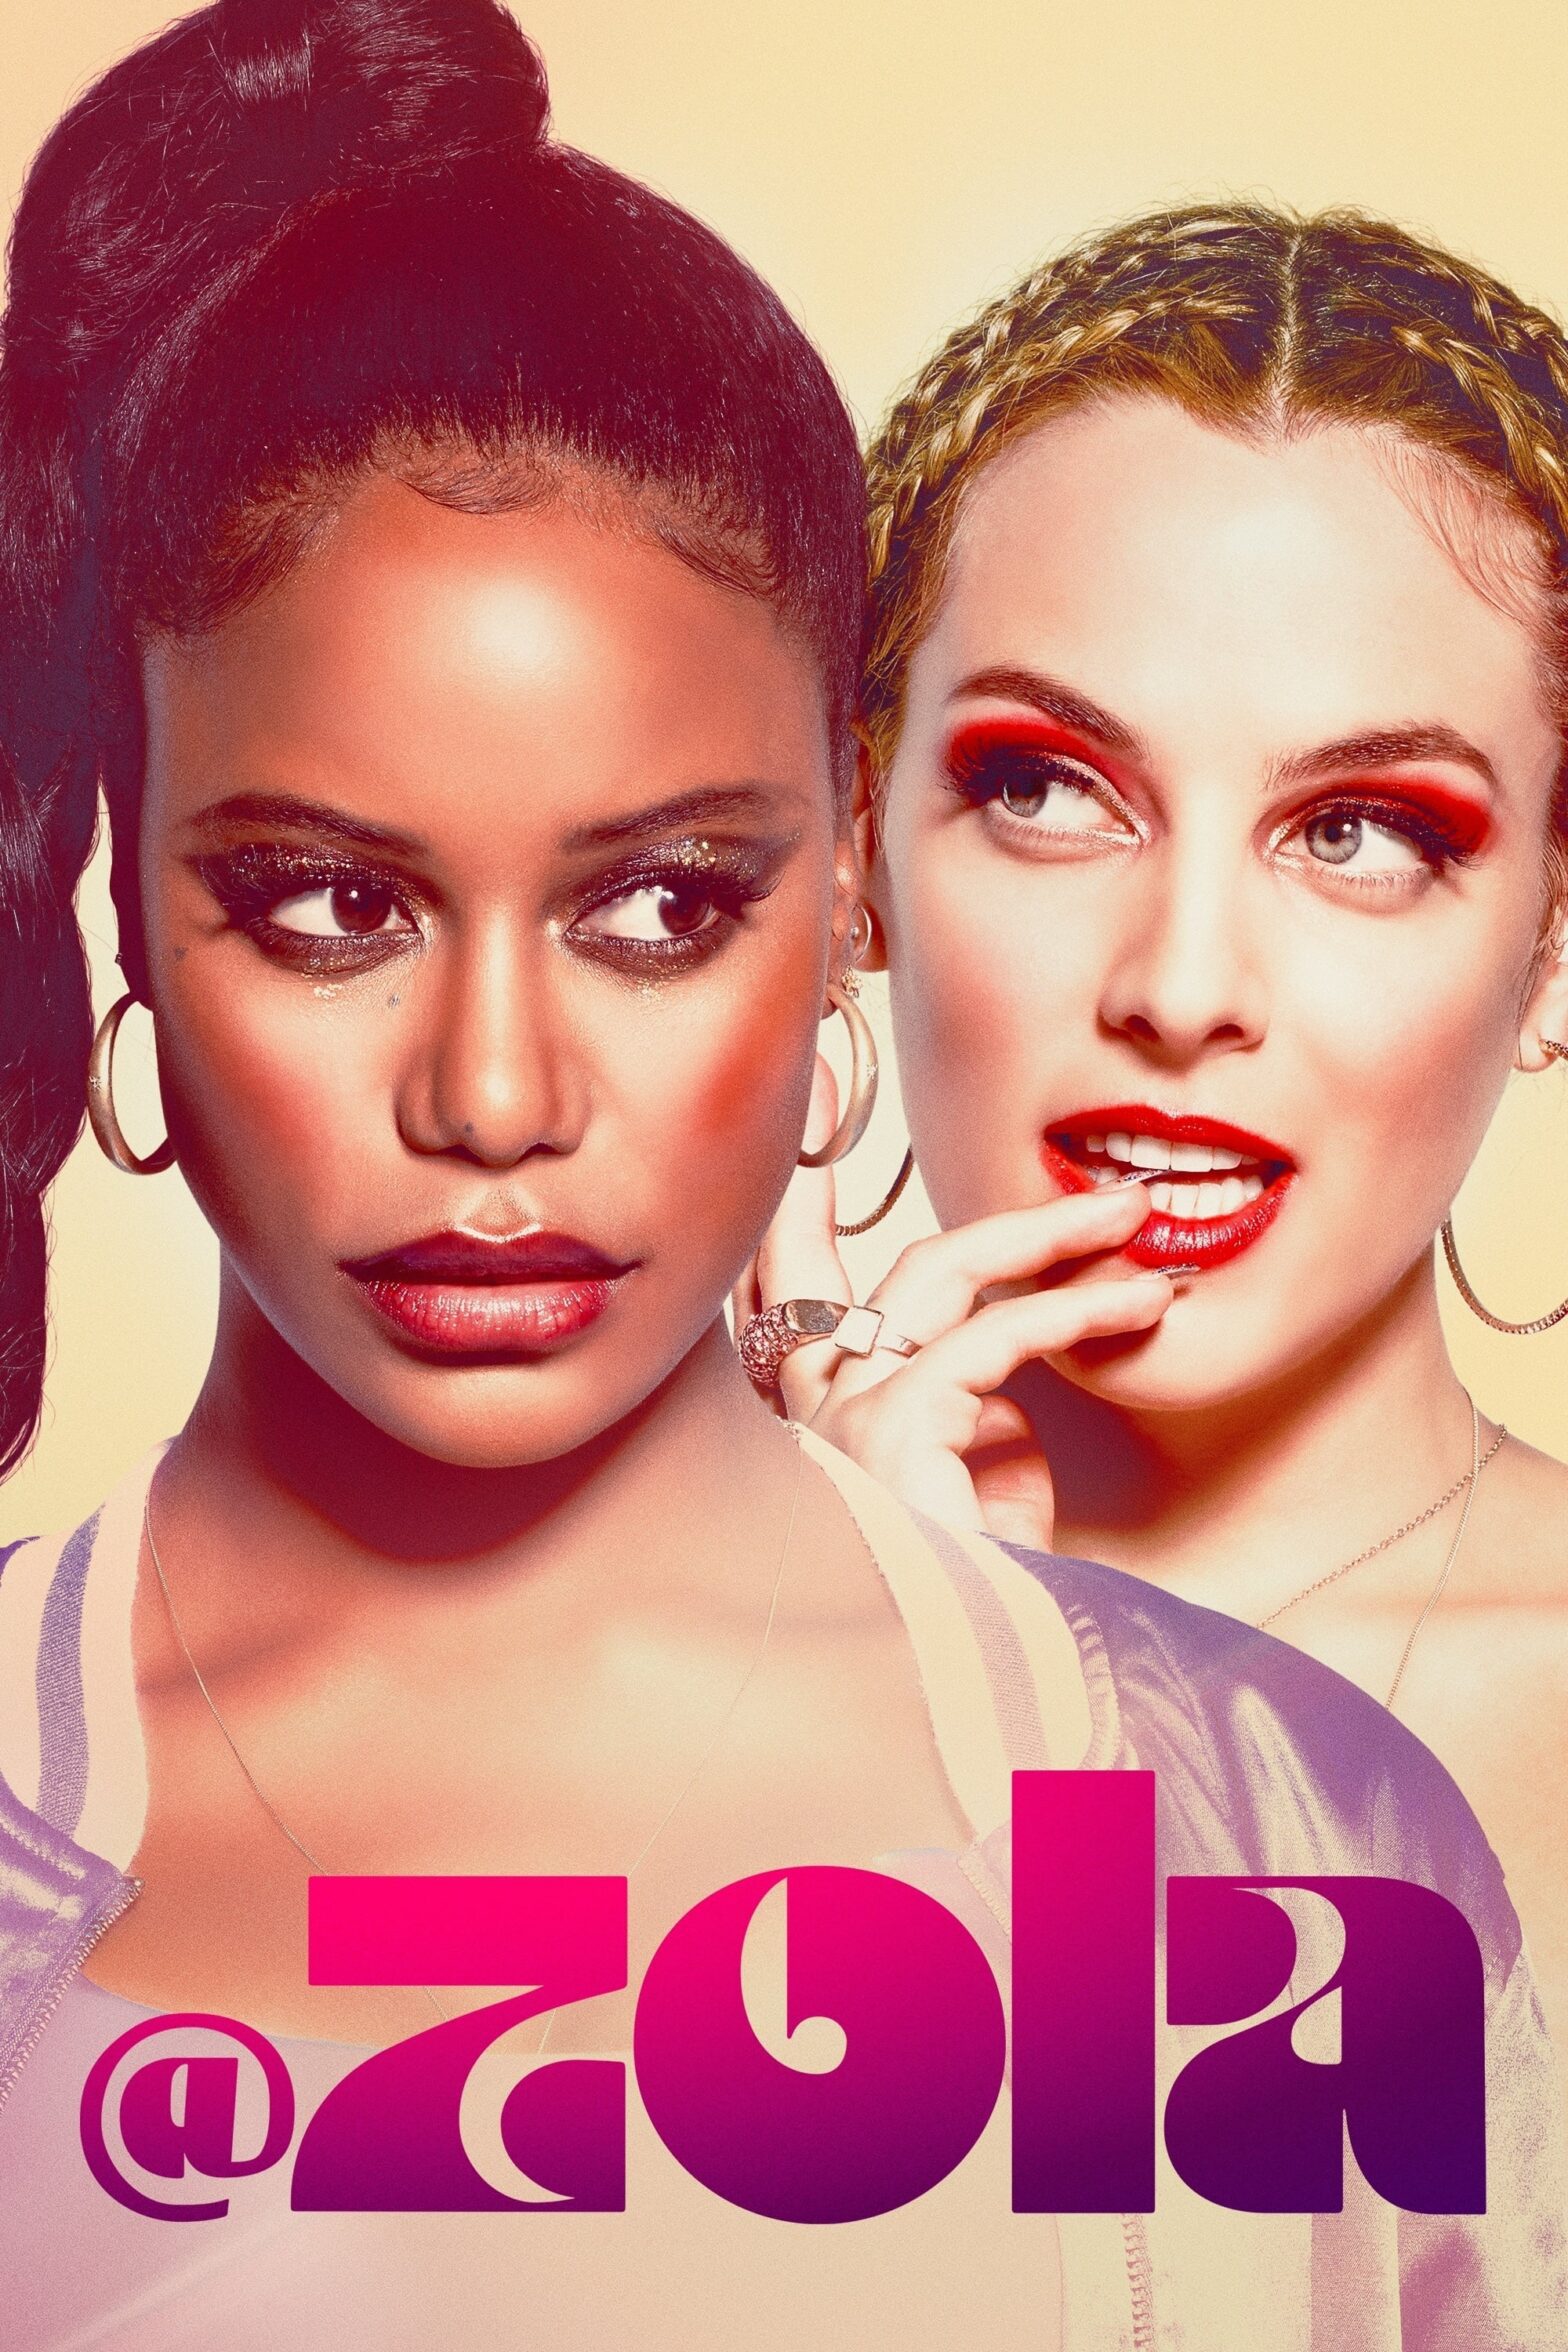 Poster for the movie "Zola"